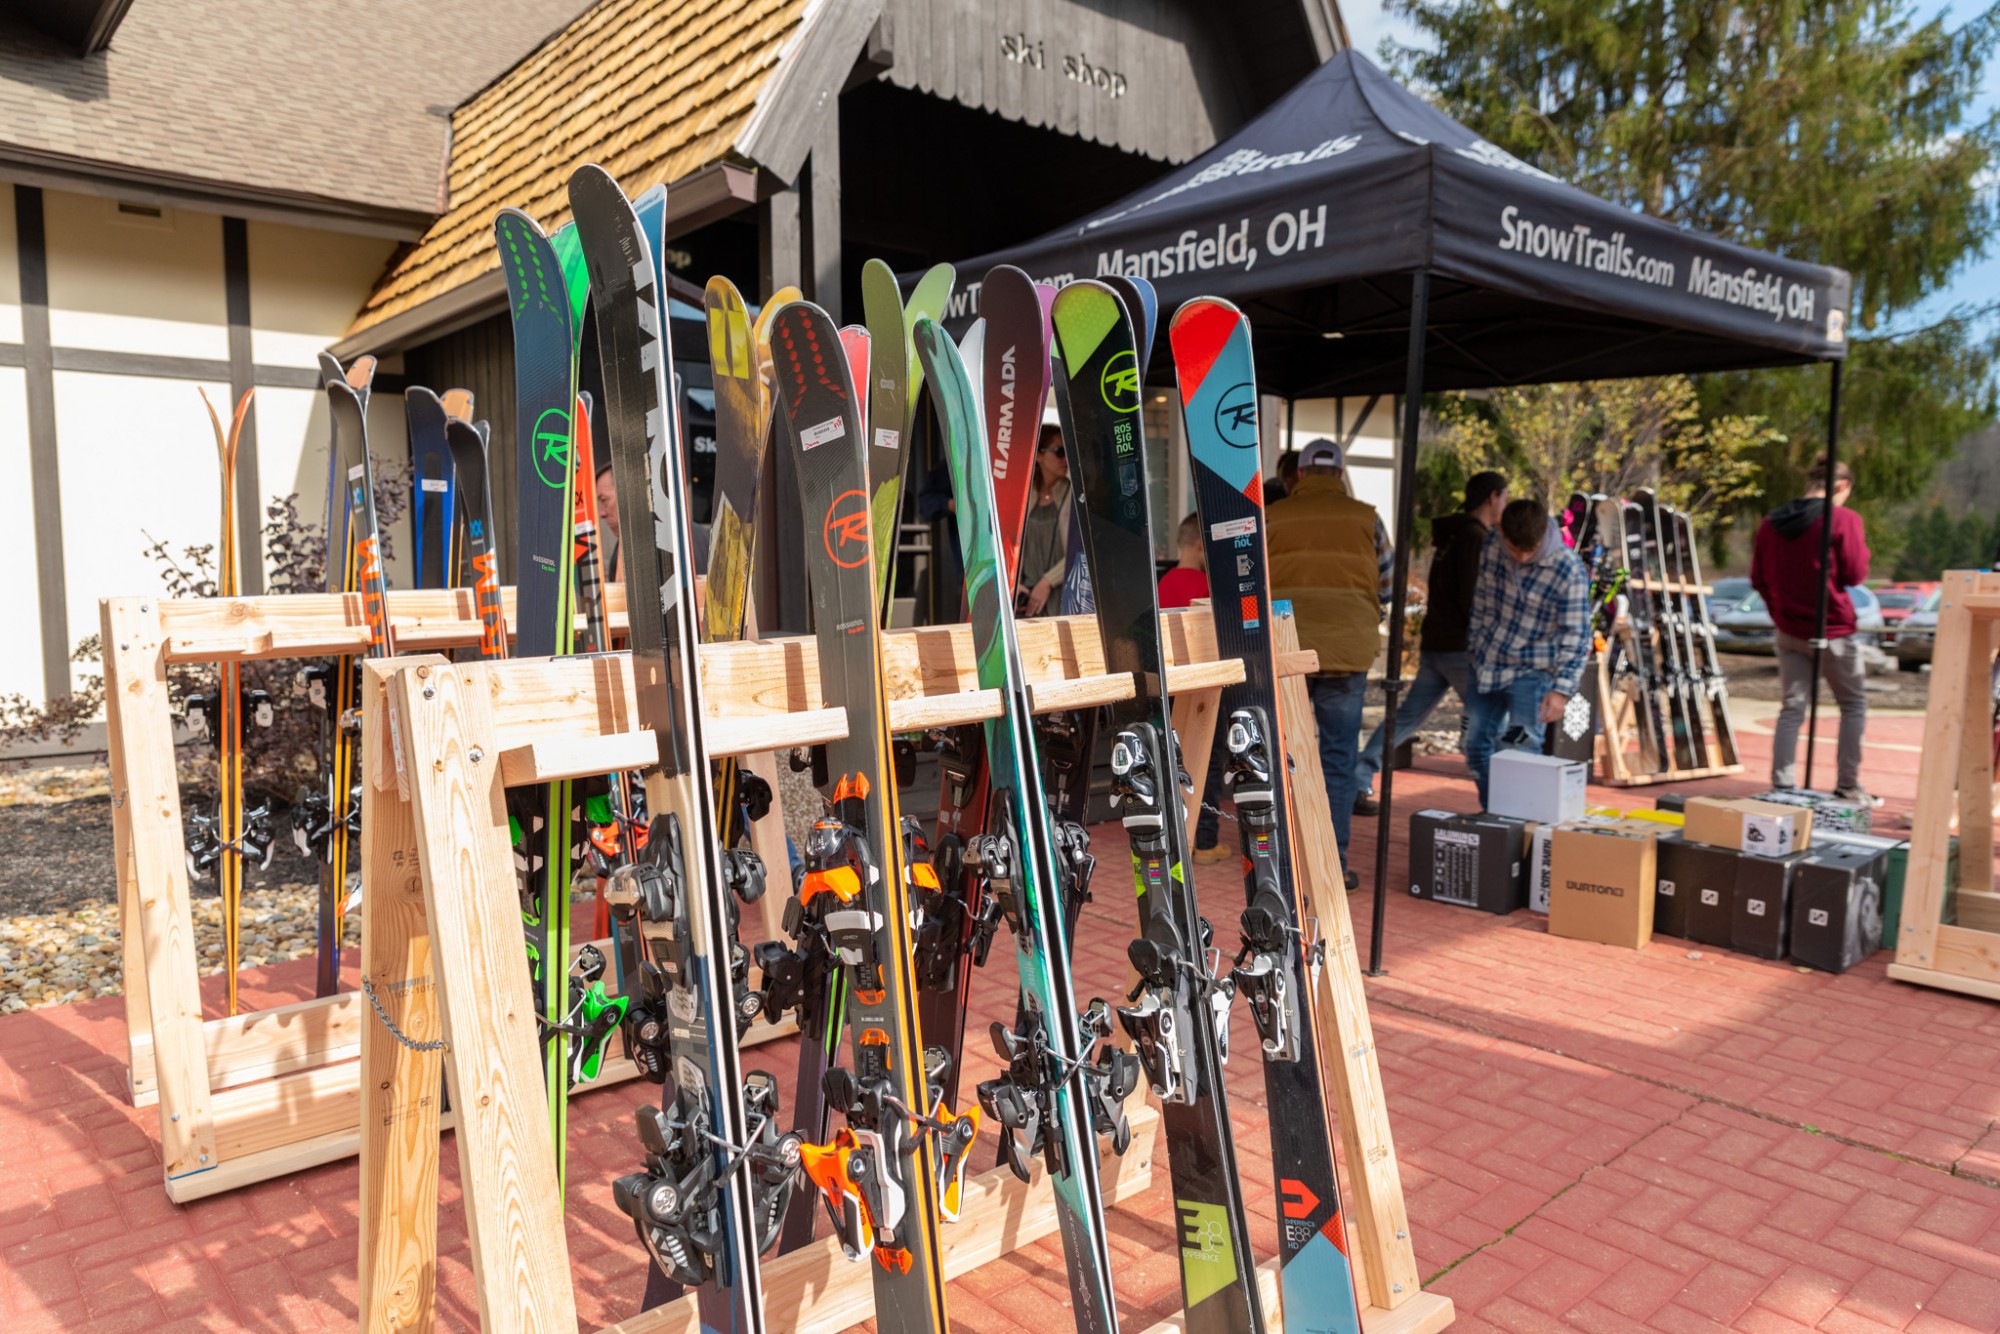 Great Deals on Skis and Snowboards at Snow Trails Ski Patrol Swap Weekend